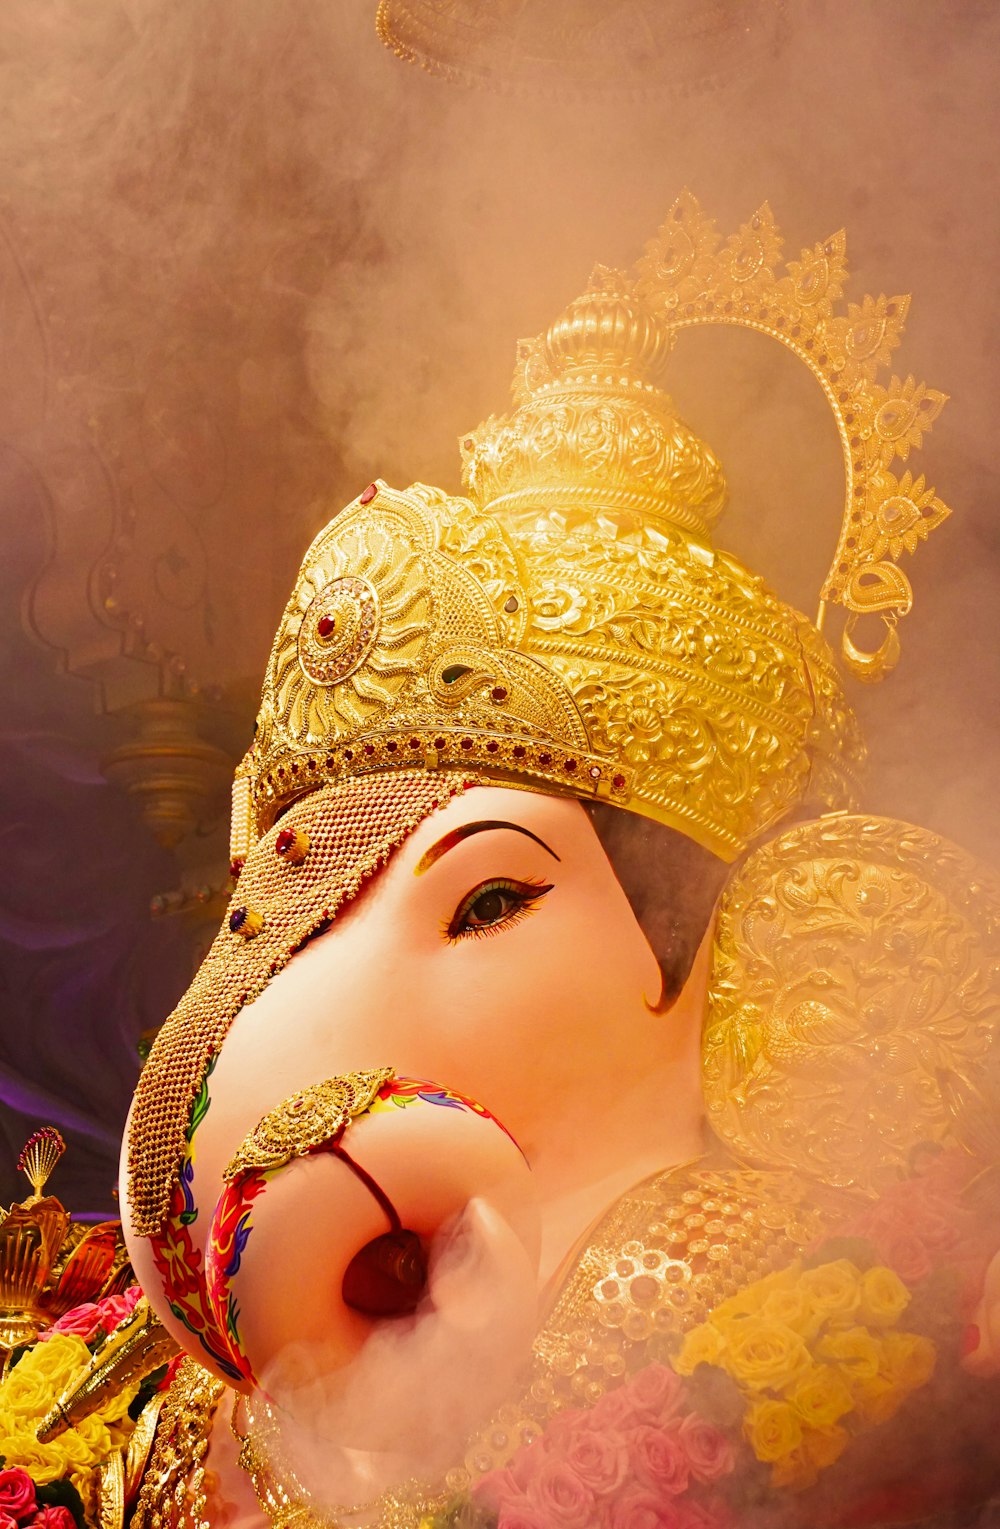 A close up of a statue of ganesh photo – Free India Image on Unsplash